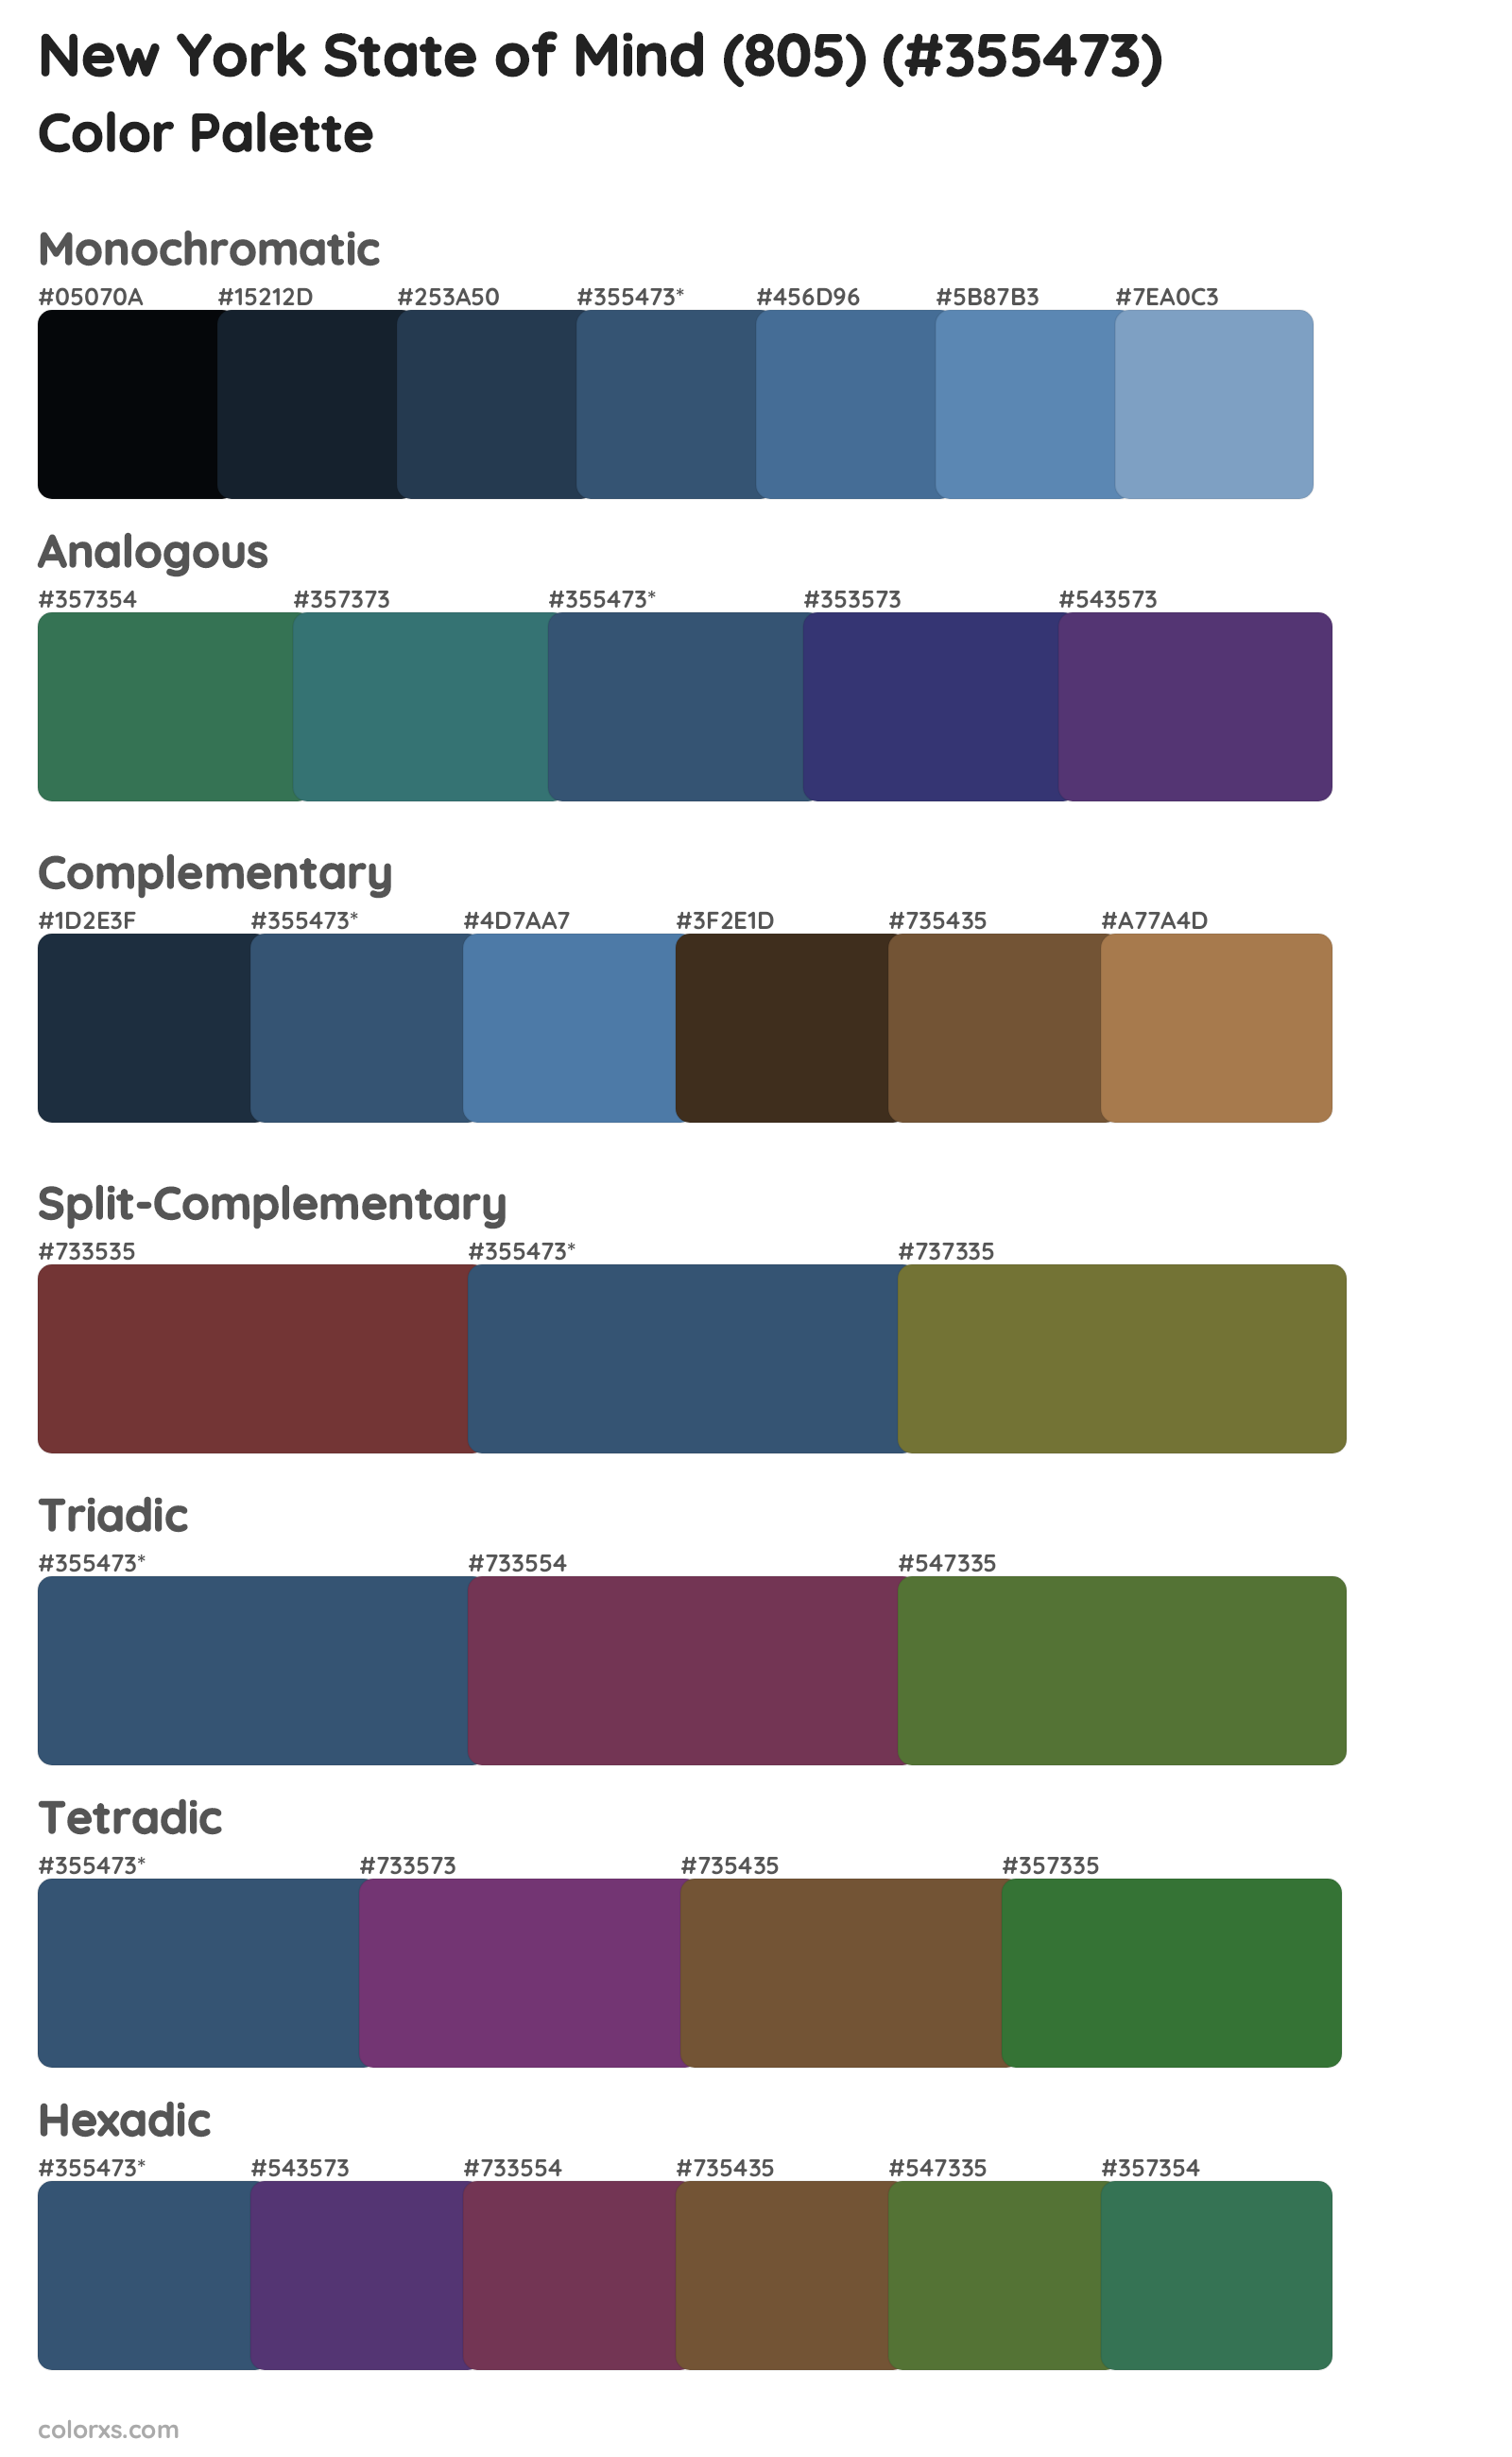 New York State of Mind (805) Color Scheme Palettes